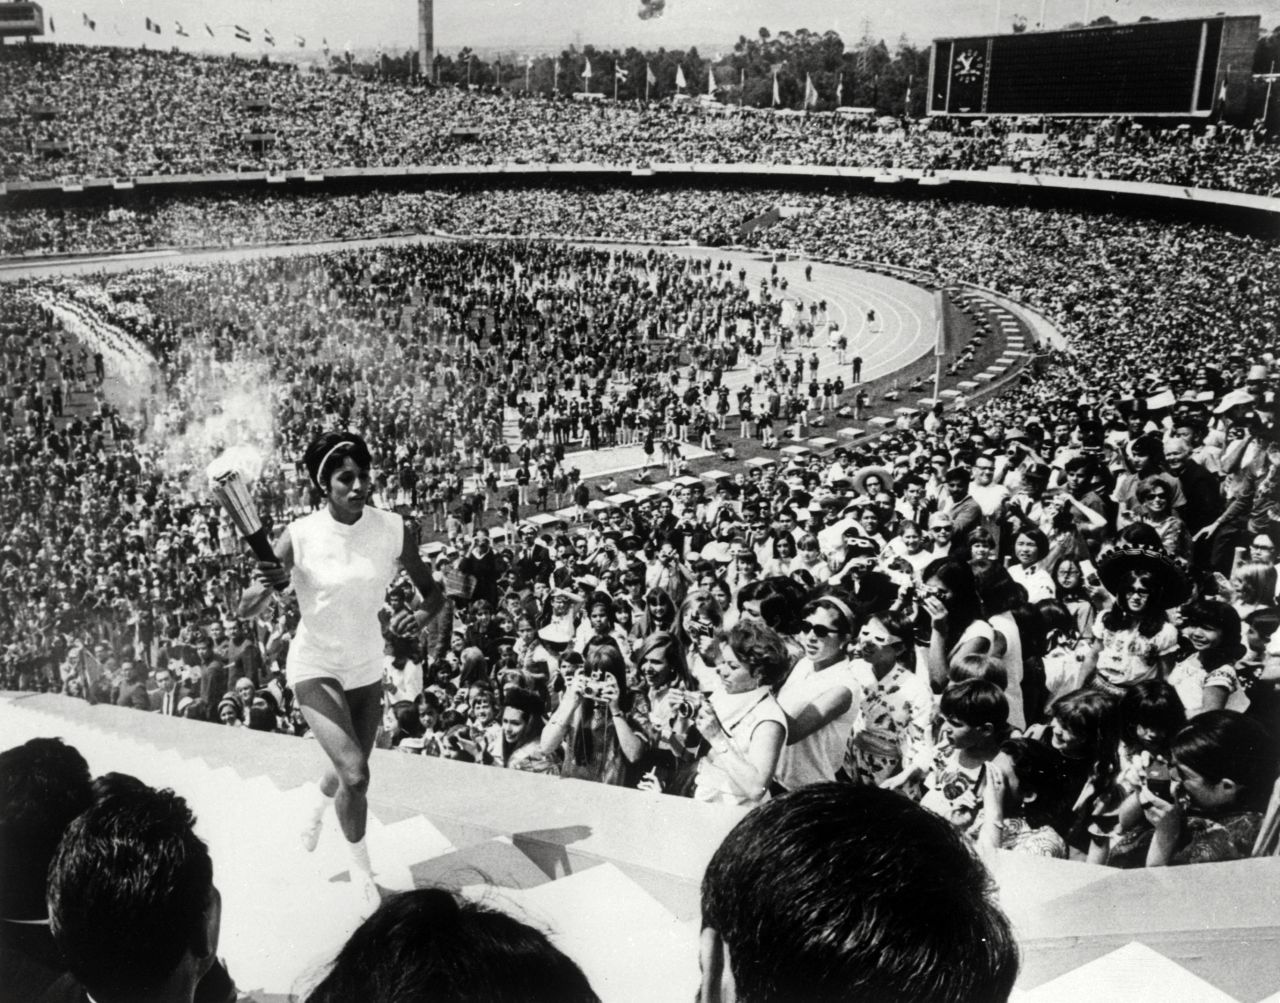 The 1968 Mexico Olympics began in controversial fashion. Revolution -- from Cuba to China -- was spreading across the world.